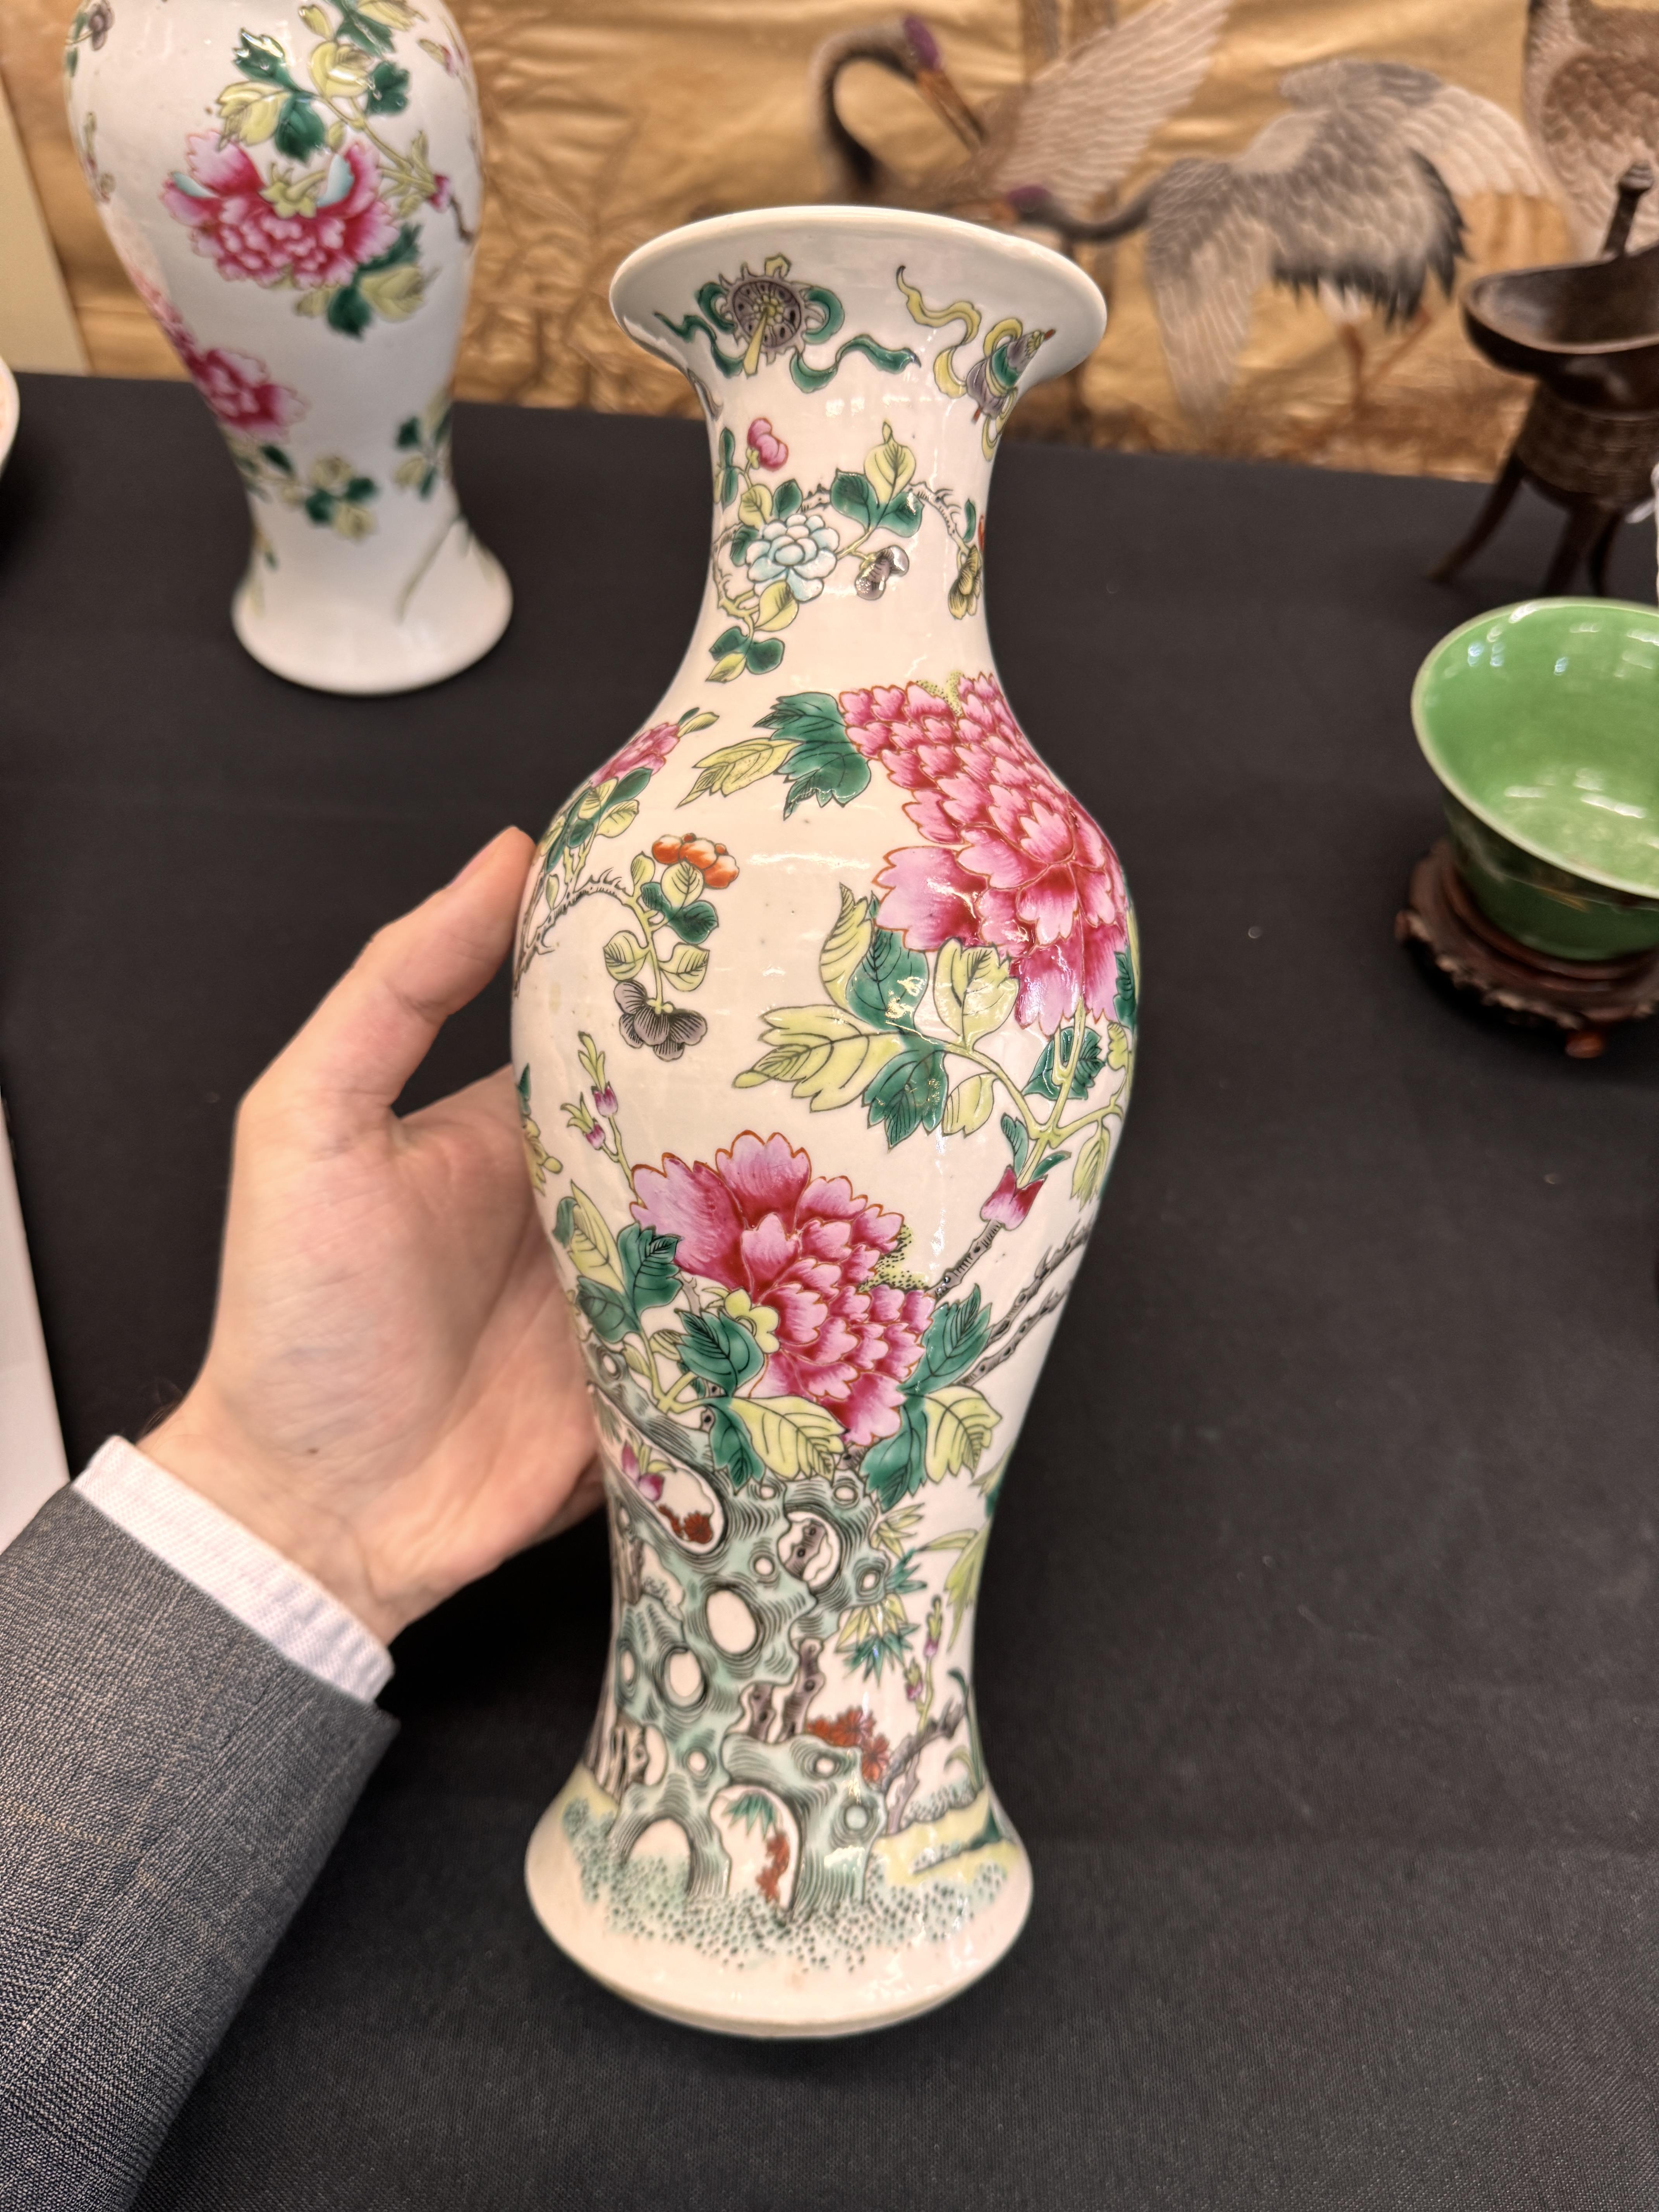 A PAIR OF CHINESE FAMILLE-ROSE 'PEONY' VASES 清 十九或二十世紀 粉彩牡丹紋瓶一對 - Image 5 of 19